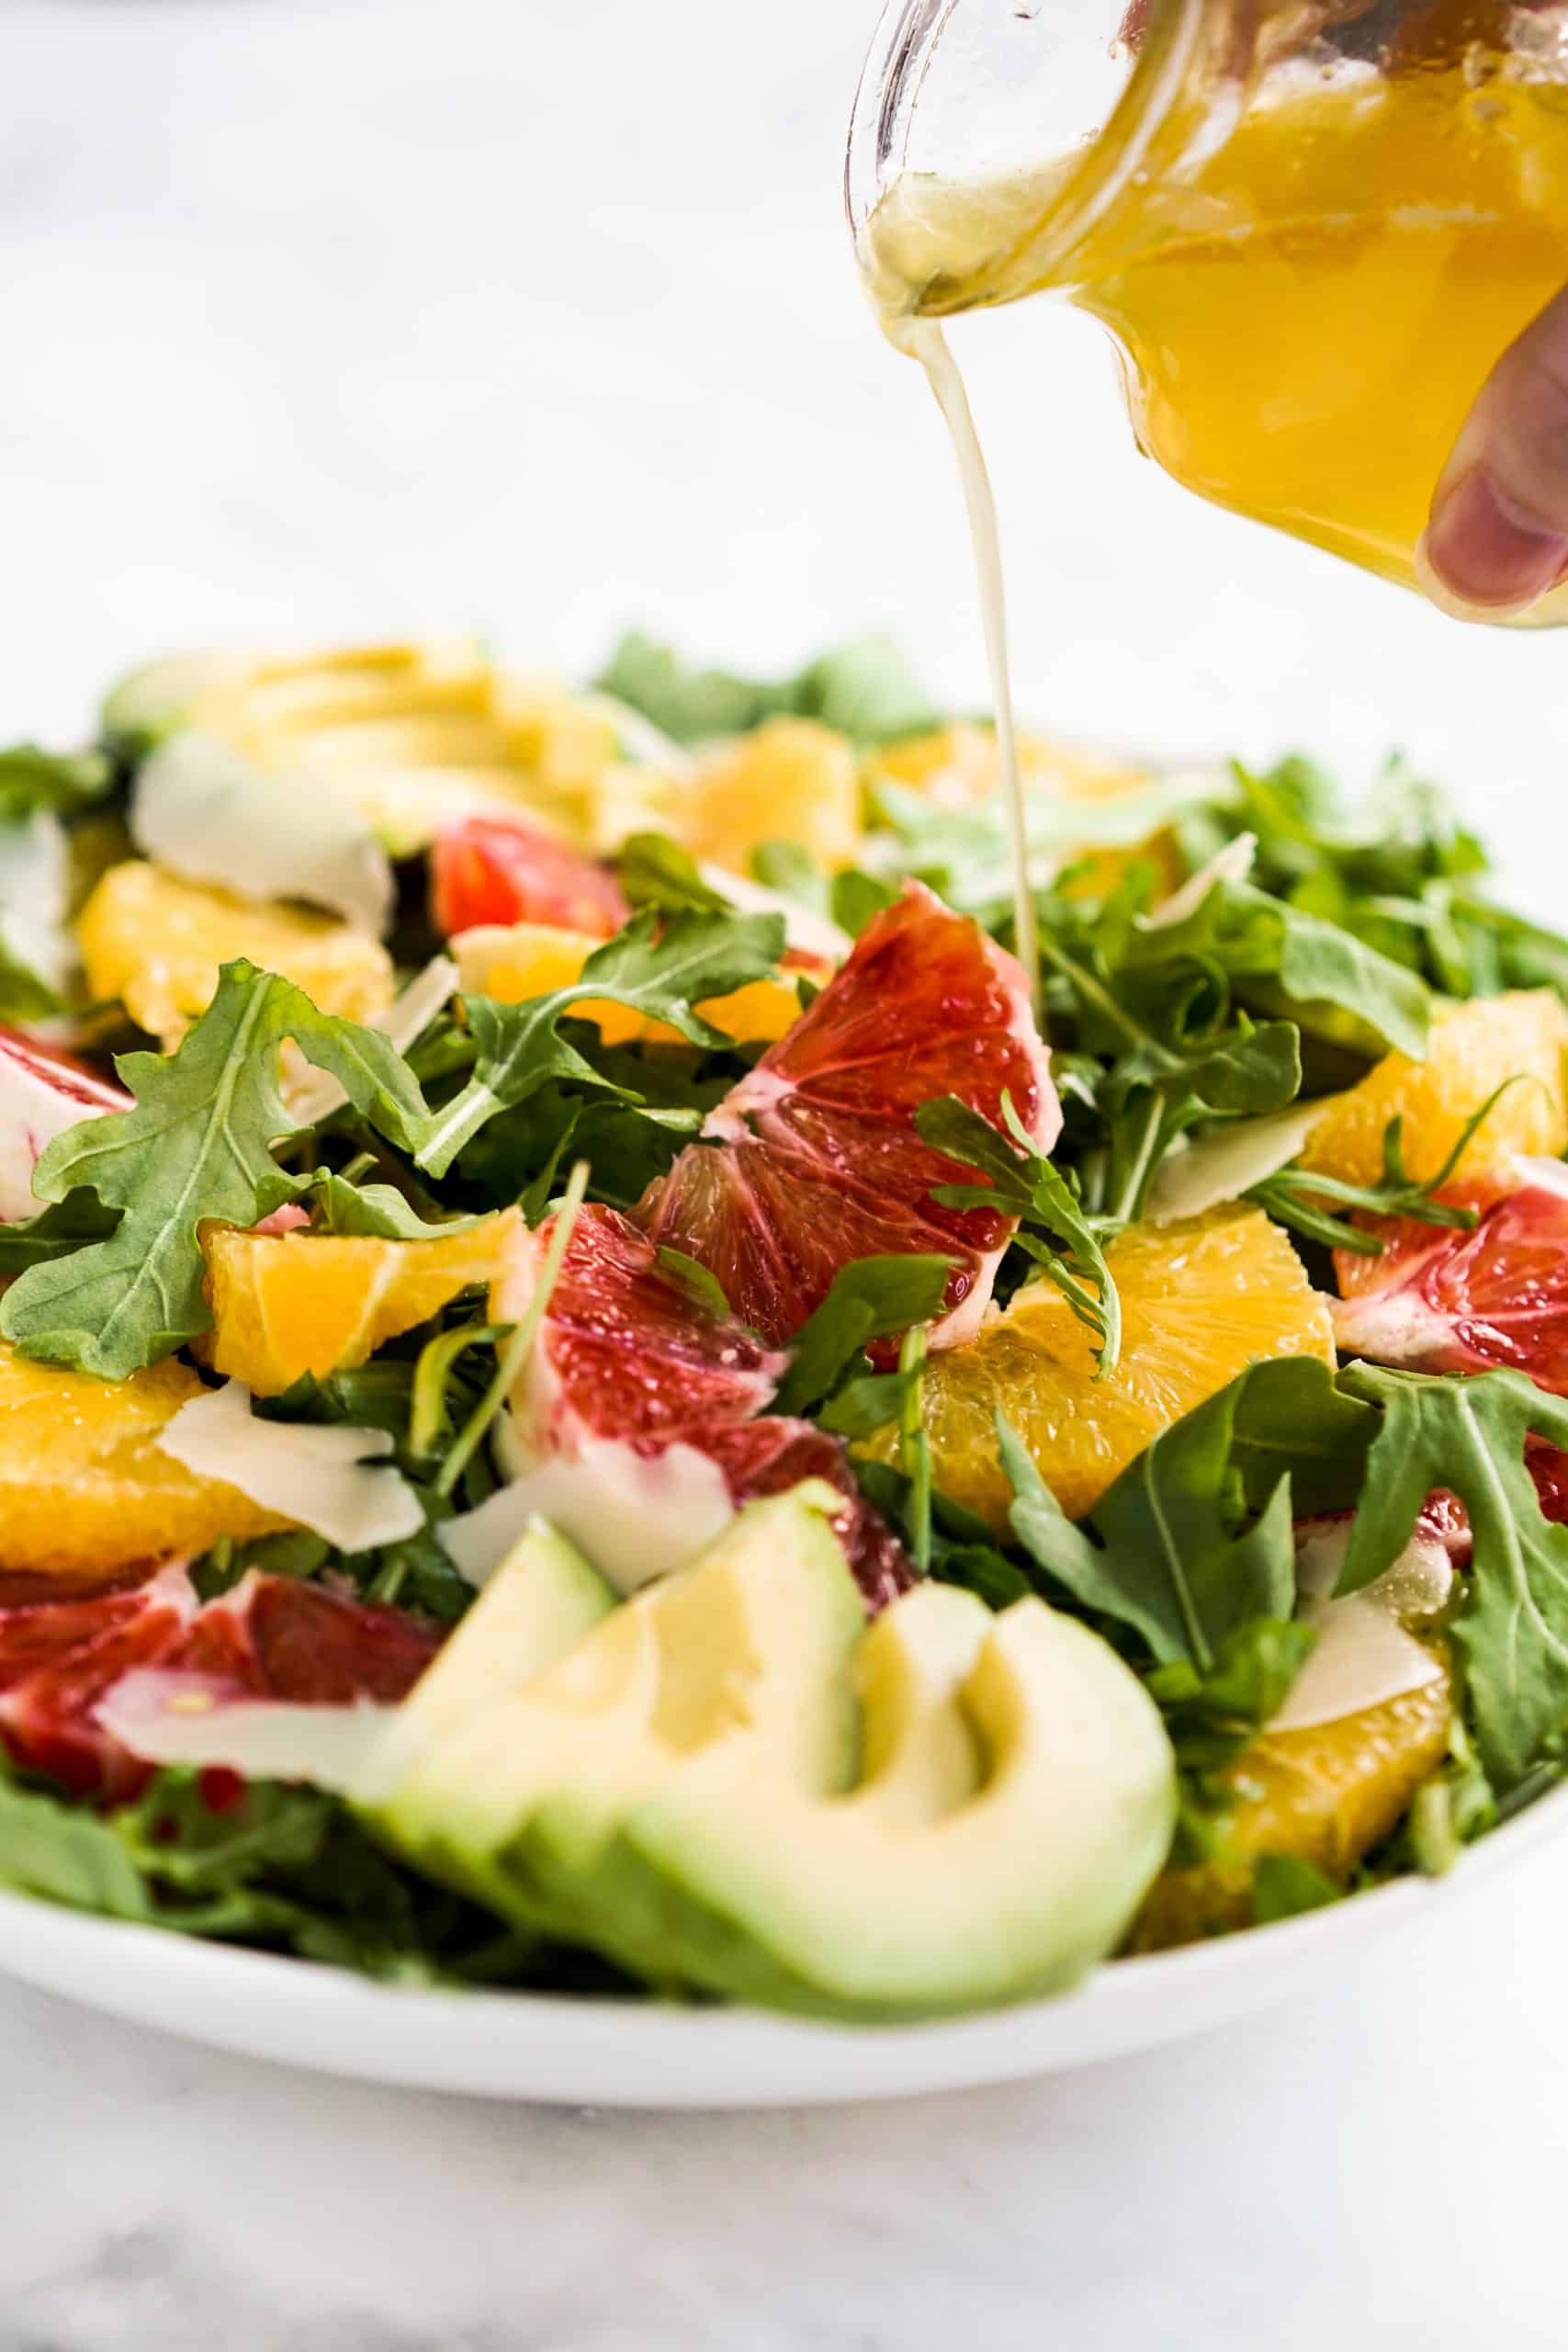 Avocado Orange Salad - a light, easy and healthy citrus salad! Avocado, oranges, blood oranges, parmesan cheese topped on a bed of arugula, drizzled with Lemon Dressing. Vegan and vegetarian. via @joyousapron